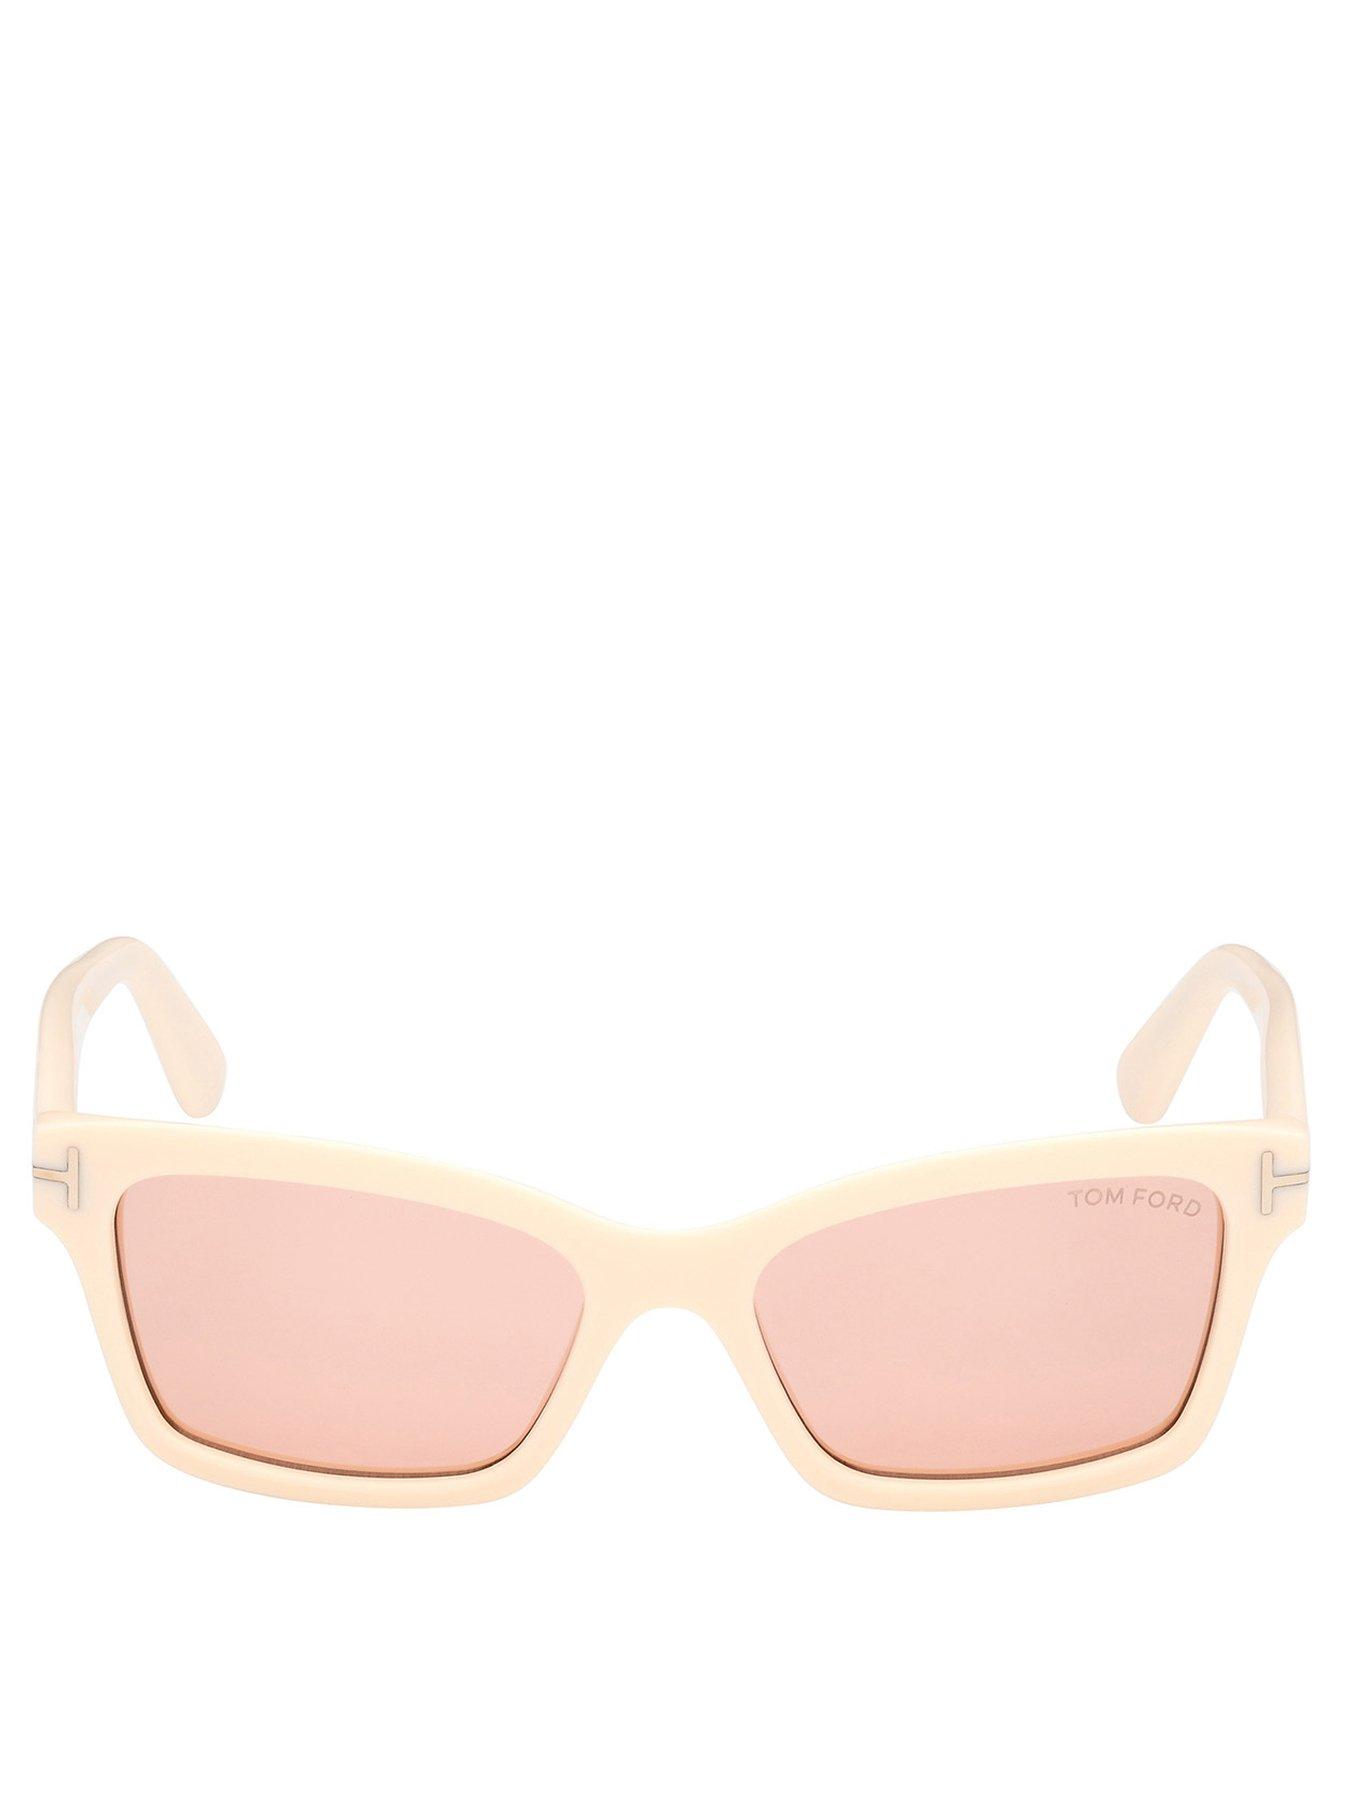 Tom Ford Ivory / Gradient Or Mirror Violet Acetate Sunglasses | Very.co.uk